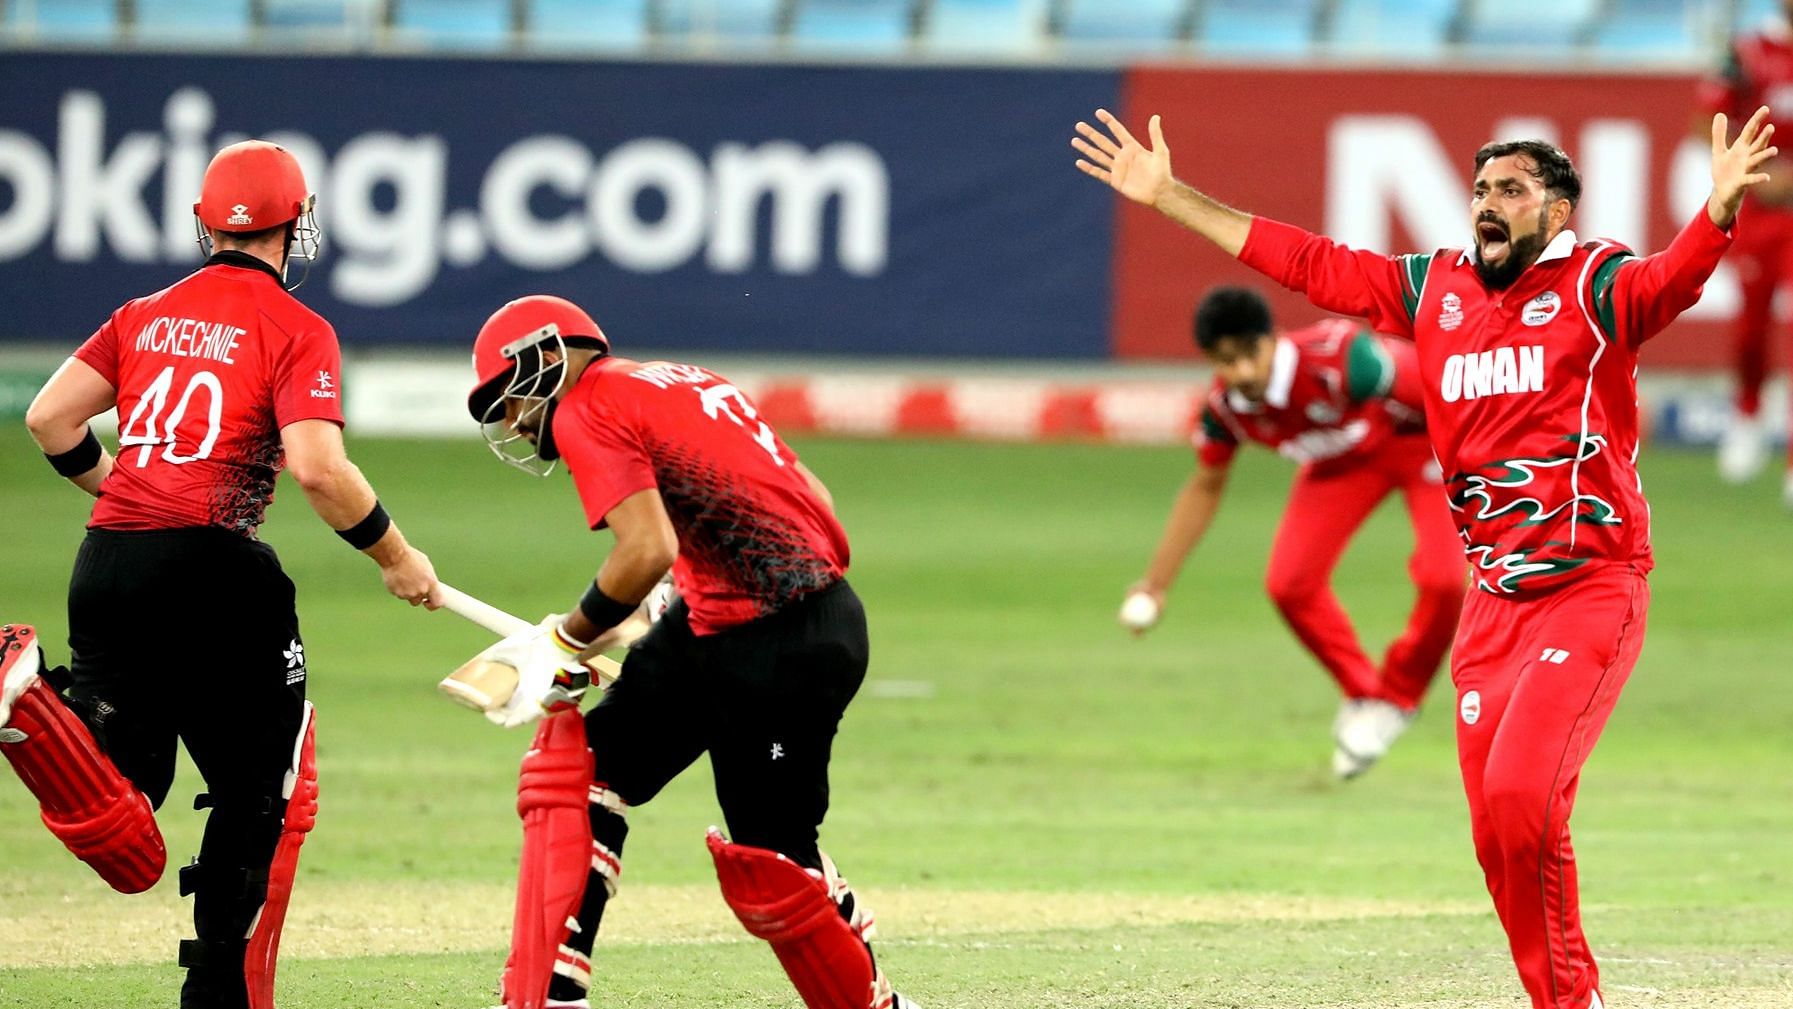 Oman defeated Hong Kong by just 12 runs in a do-or-die T20 World Cup qualifier to reach the finals in Australia.